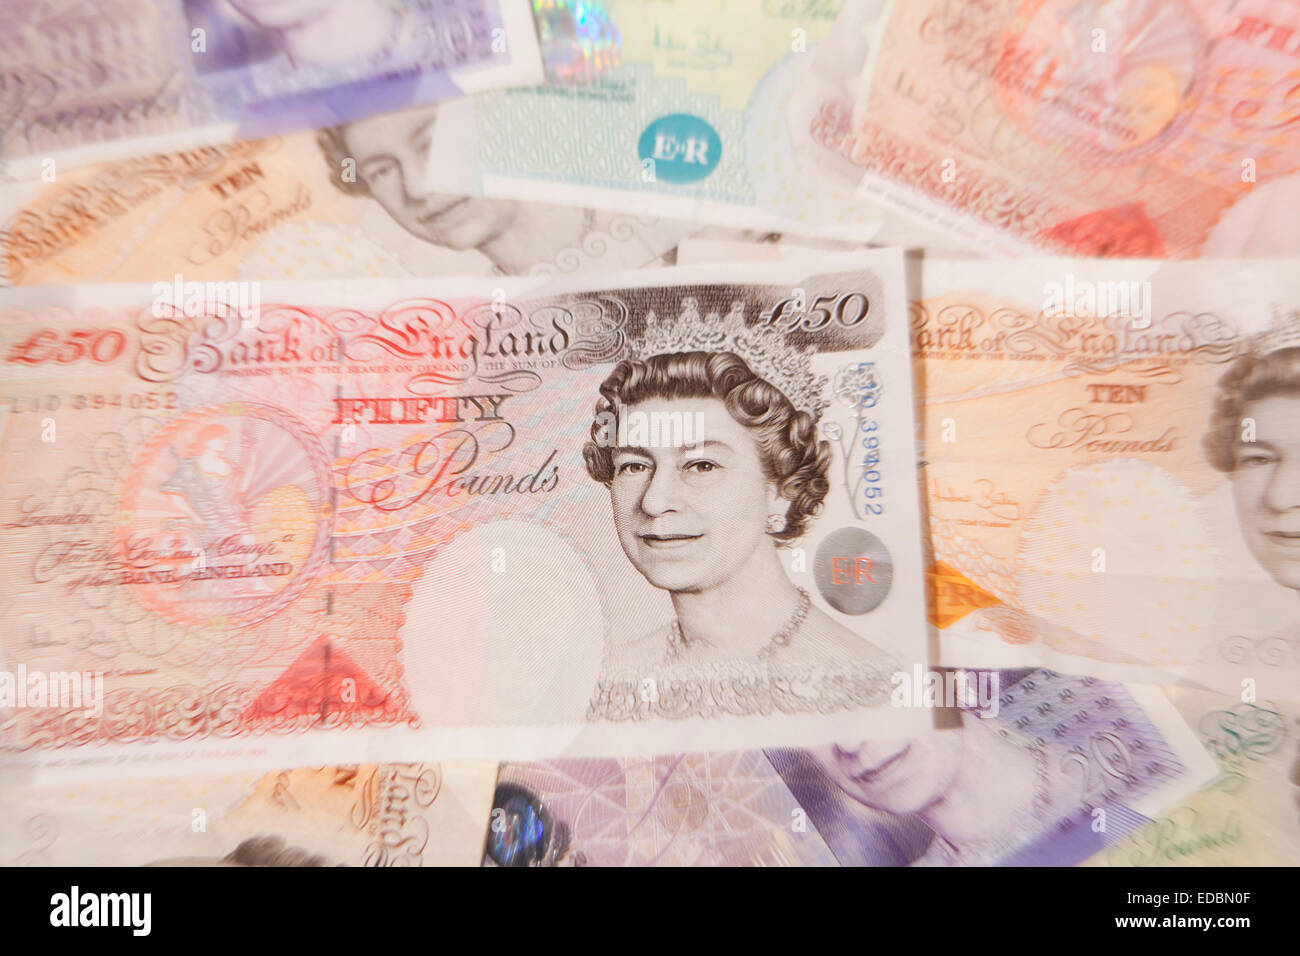 Illustrative image of a fifty pound note. Stock Photo